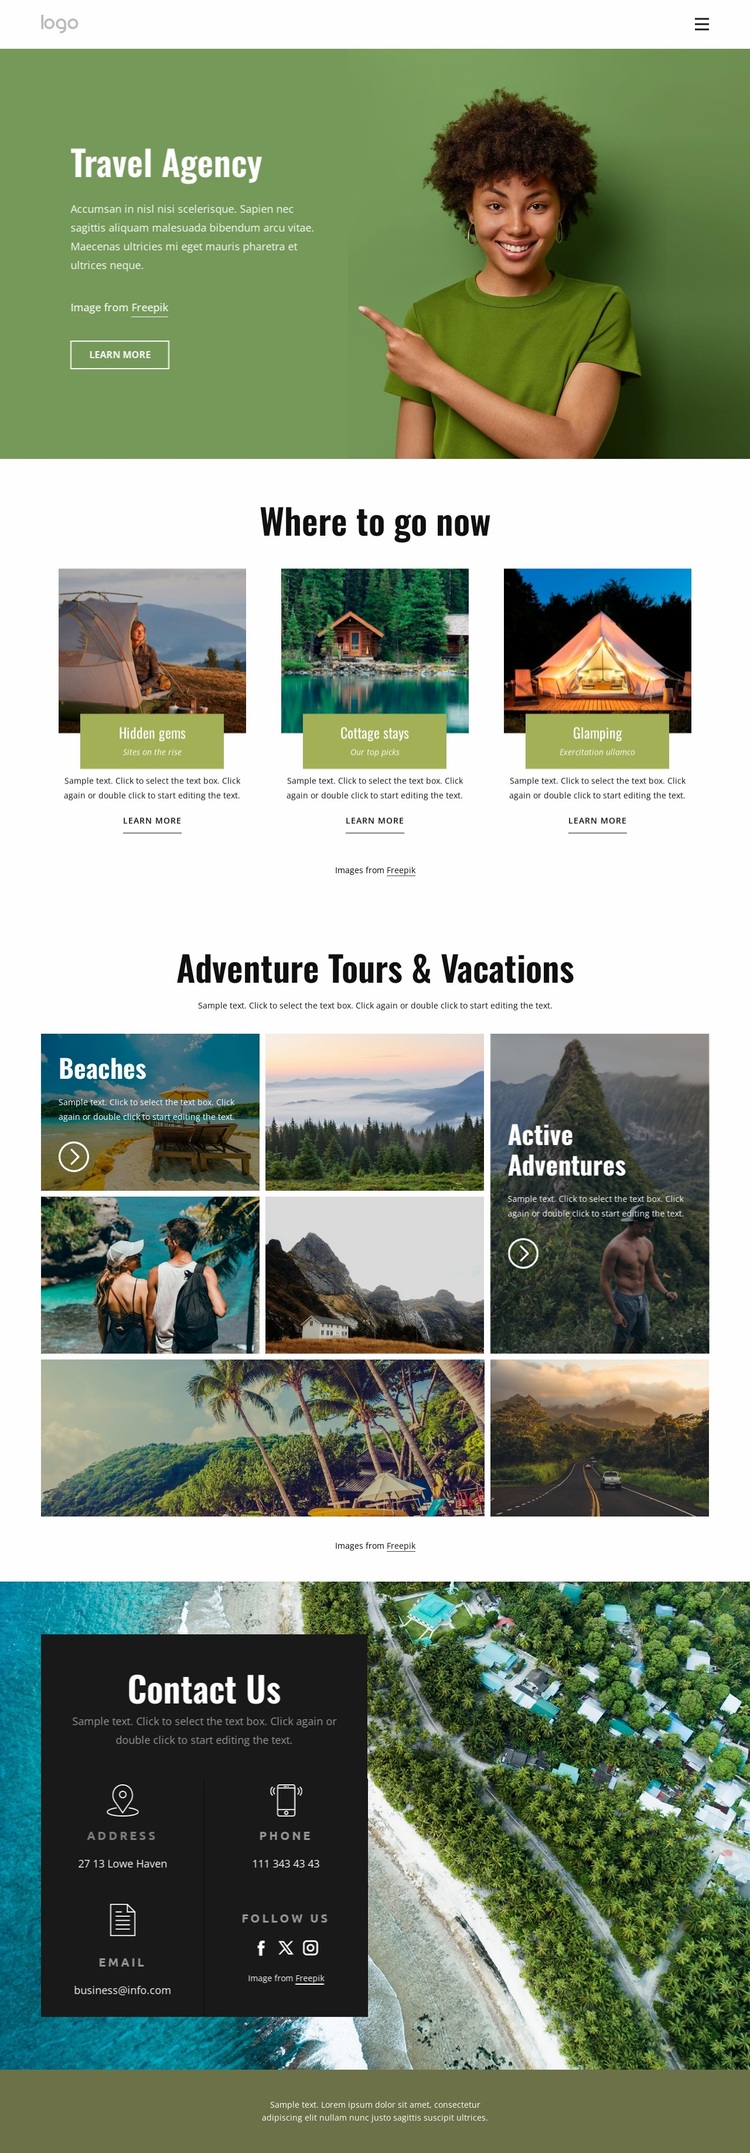 Adventure tours and vacations Website Design